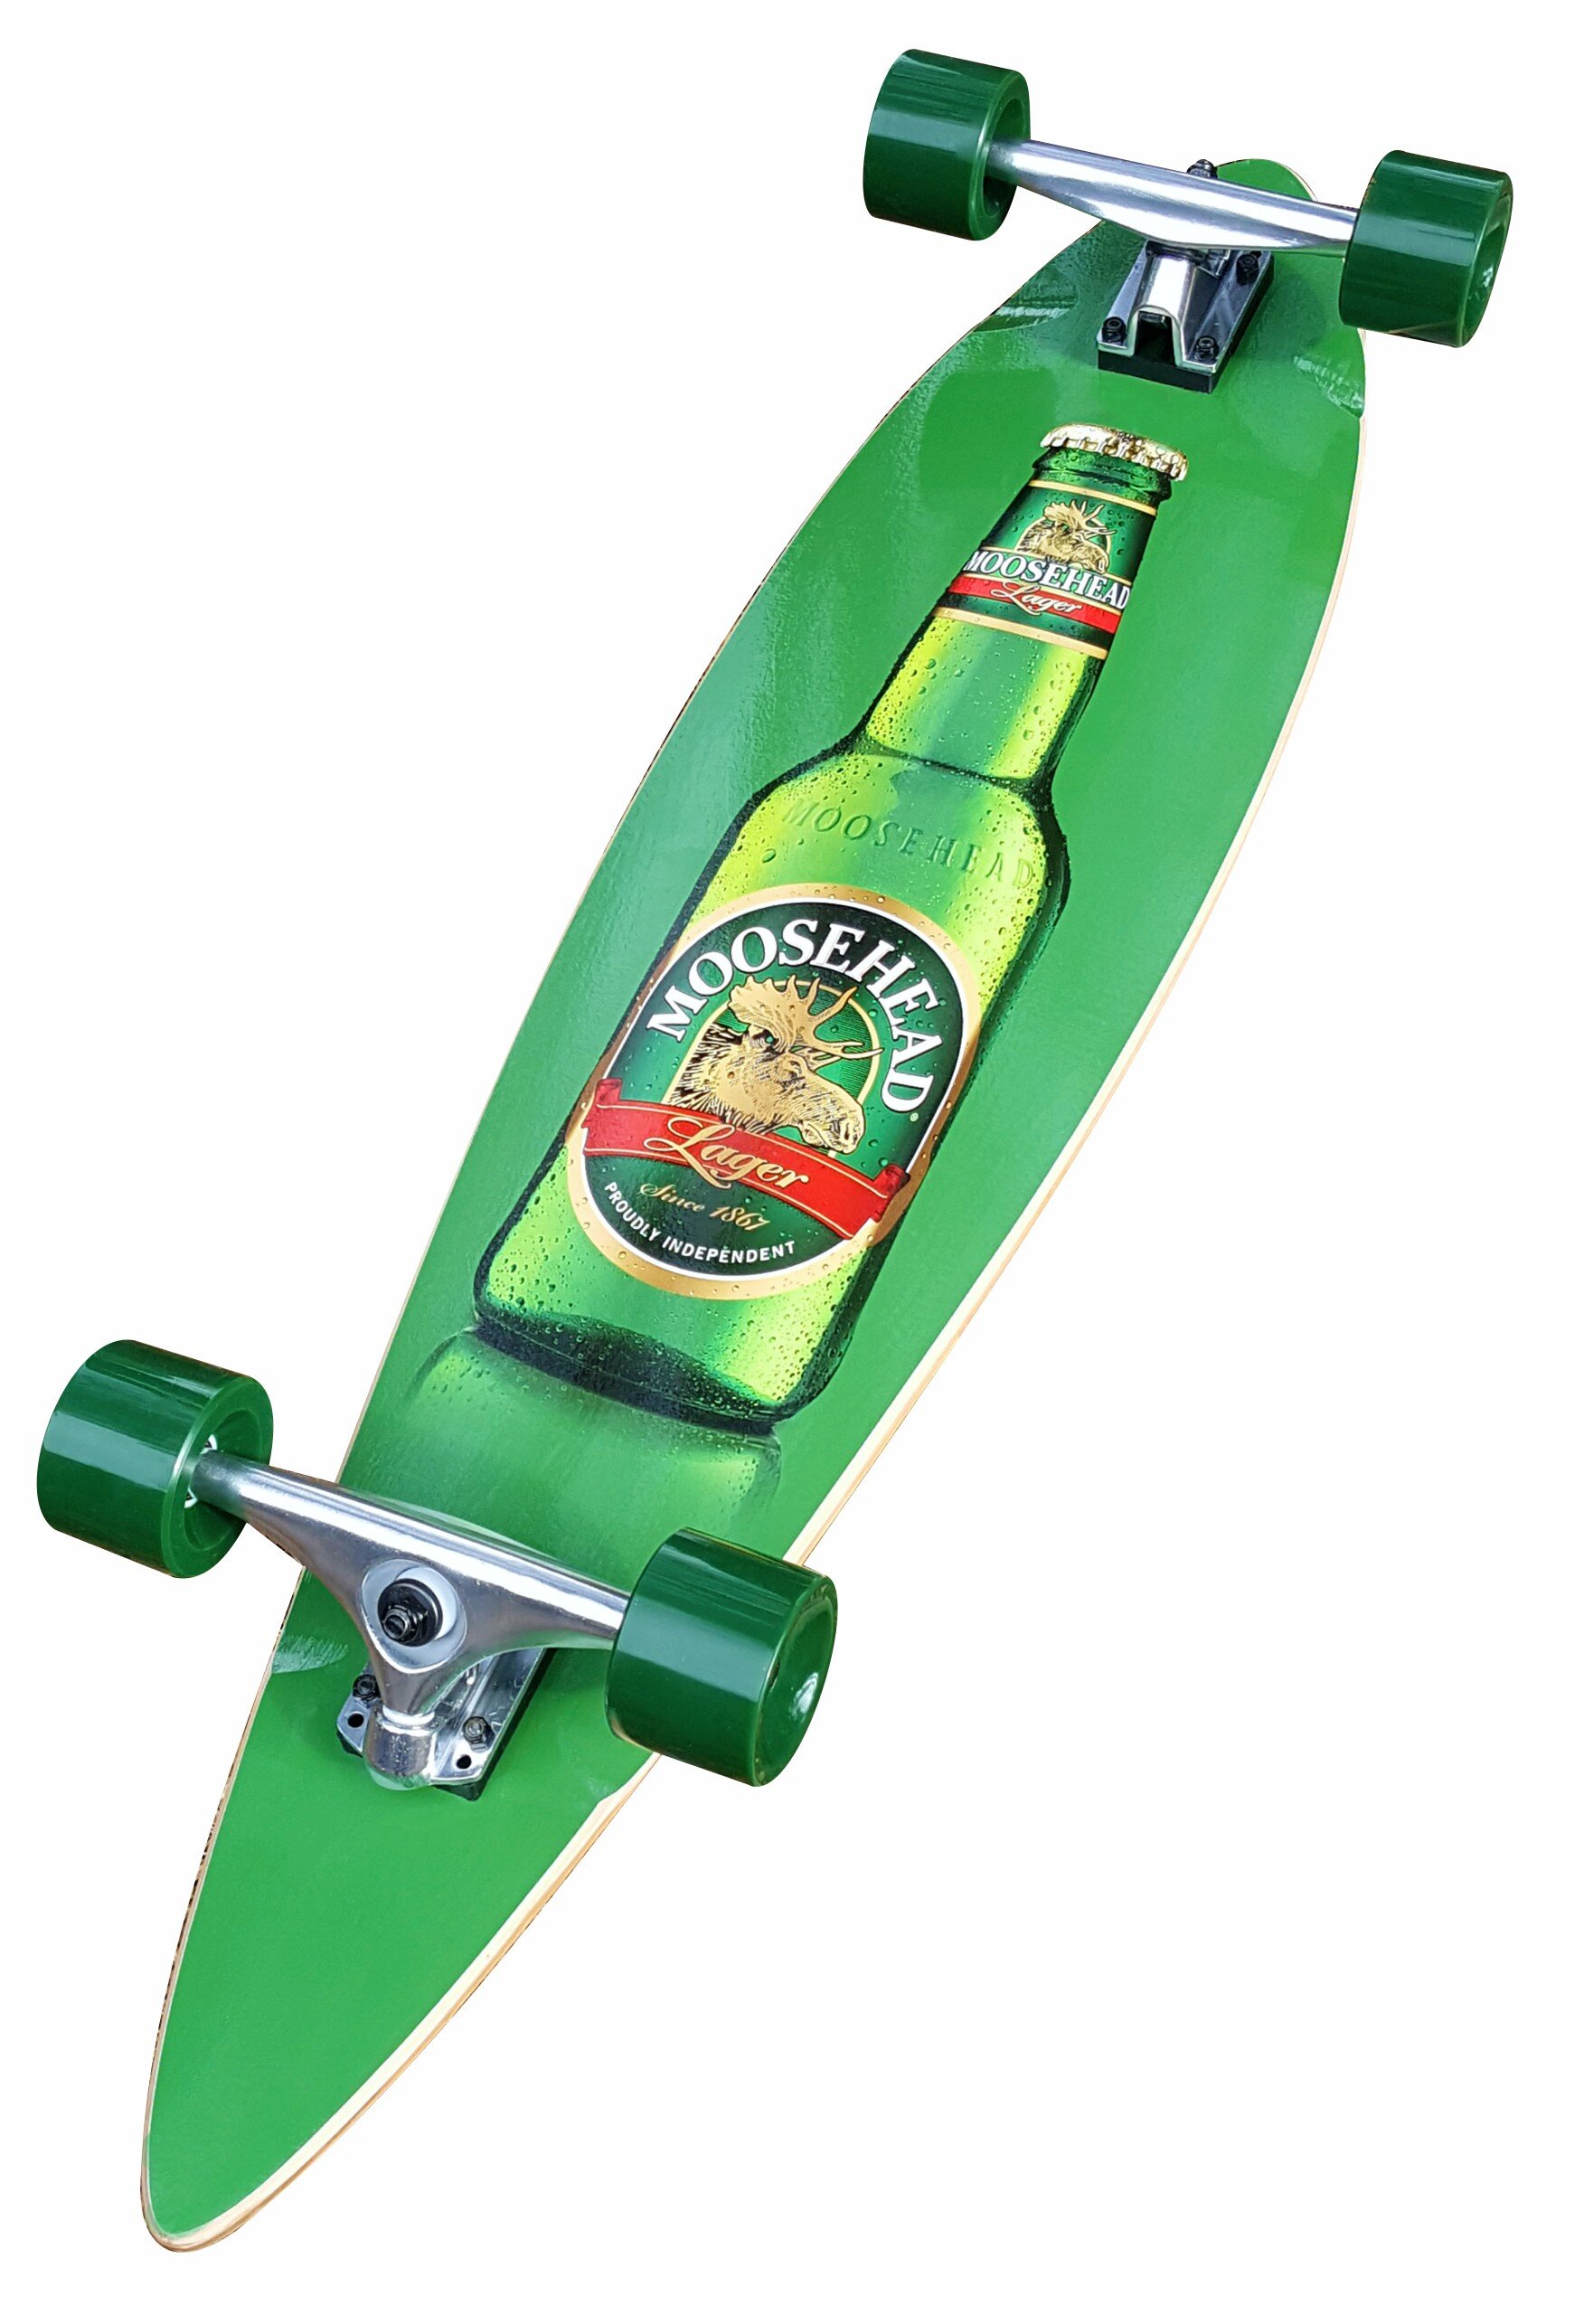 Private label OEM Promo  Longboards with Custom Graphics 